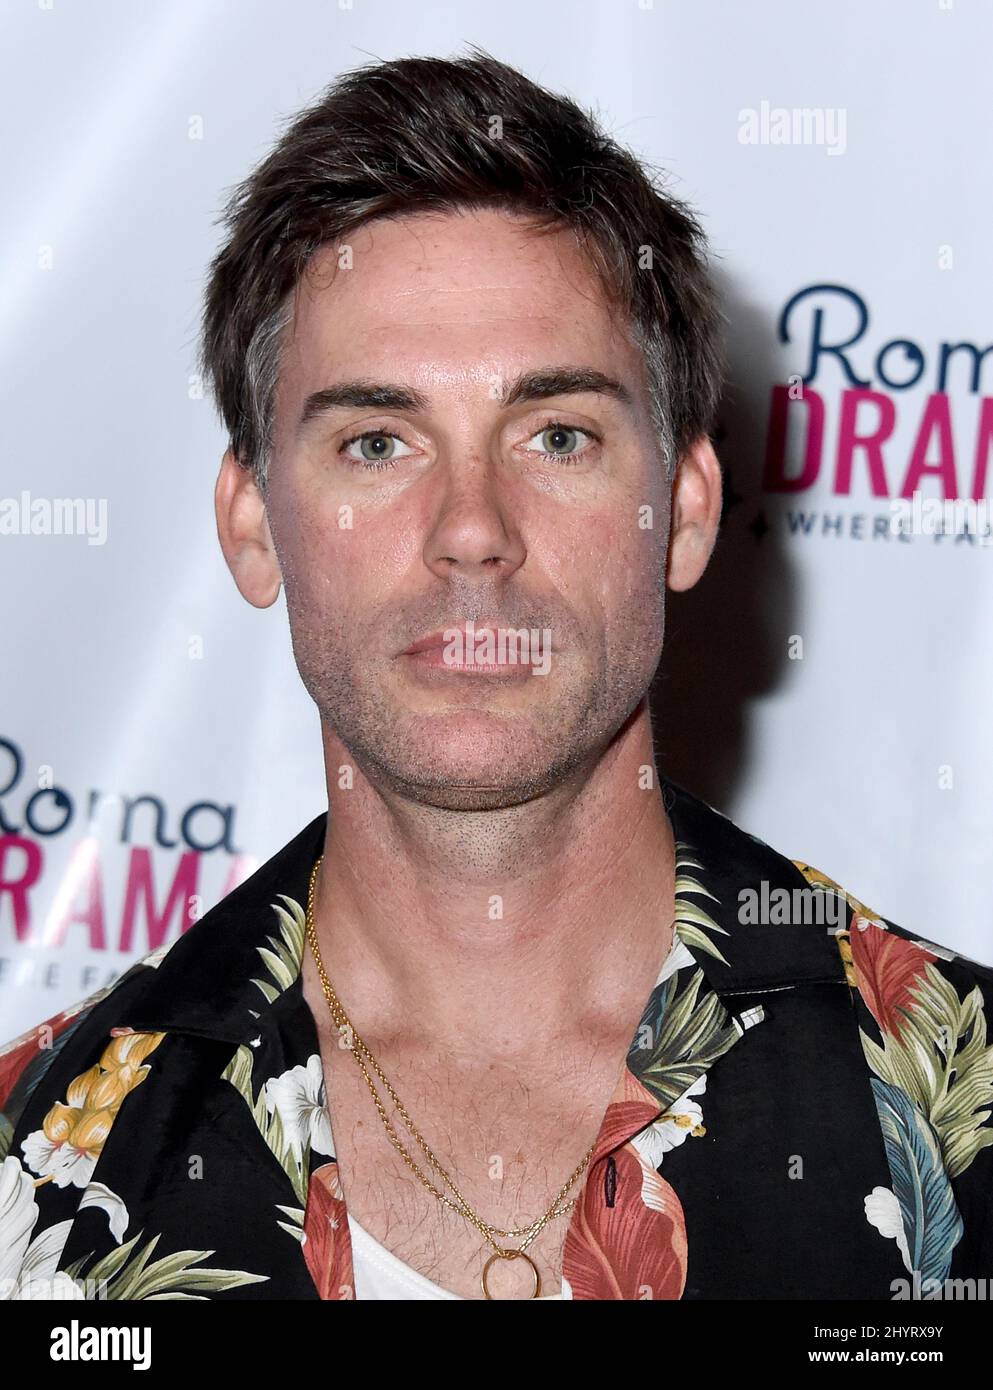 Drew Fuller at the opening day of RomaDrama LIVE! Fan Convention held at The Factory at Franklin on July 30, 2021 in Franklin, TN. Stock Photo